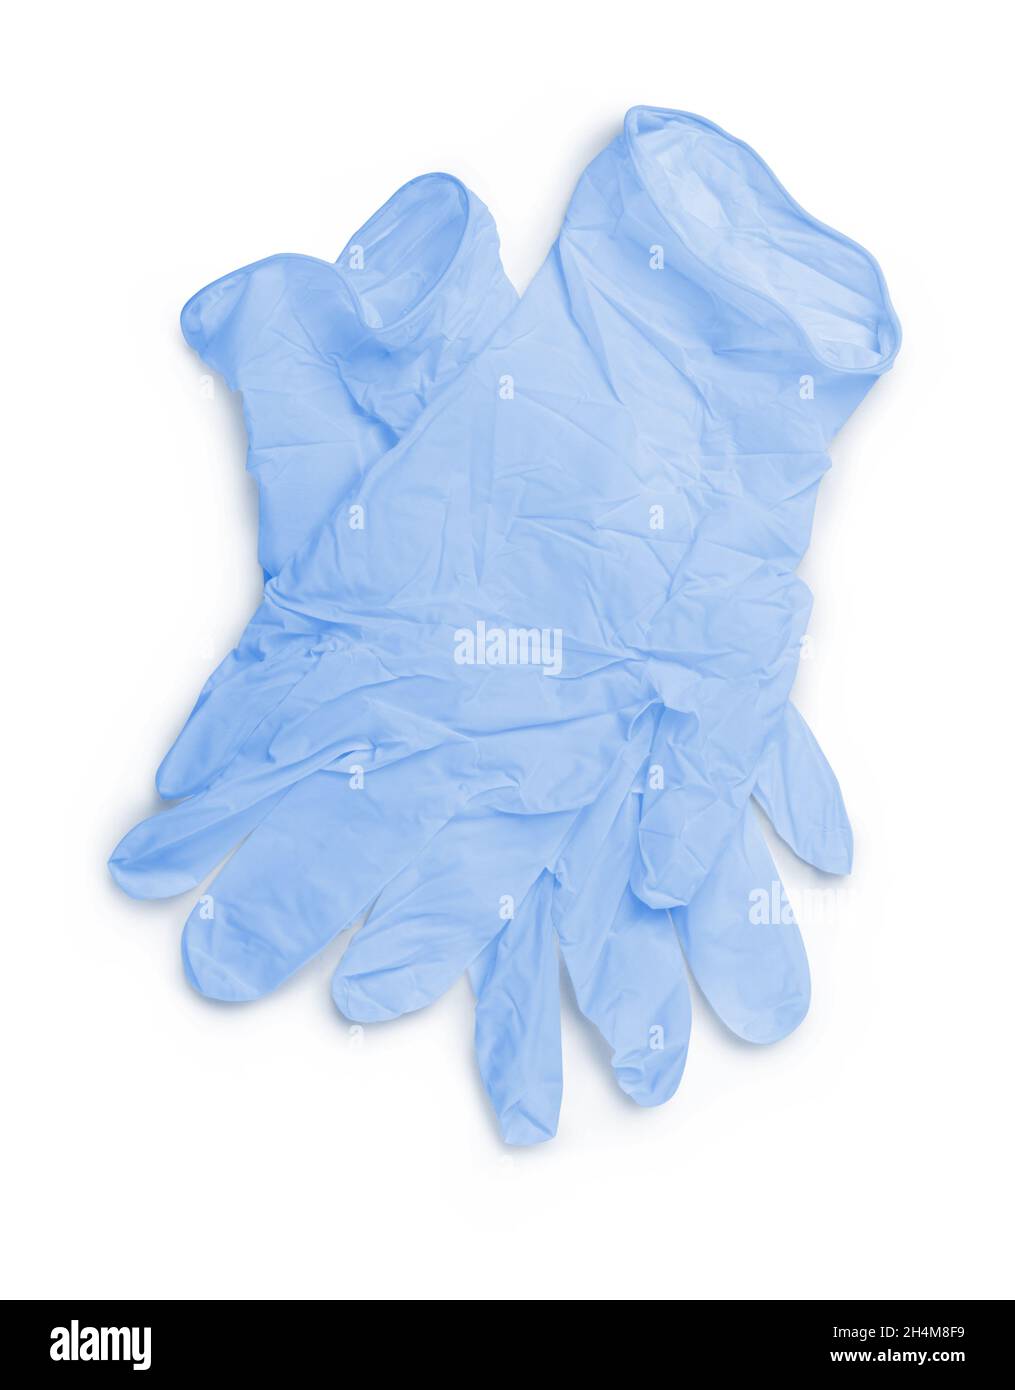 Pair of blue medical latex gloves closeup isolated on a white background Stock Photo